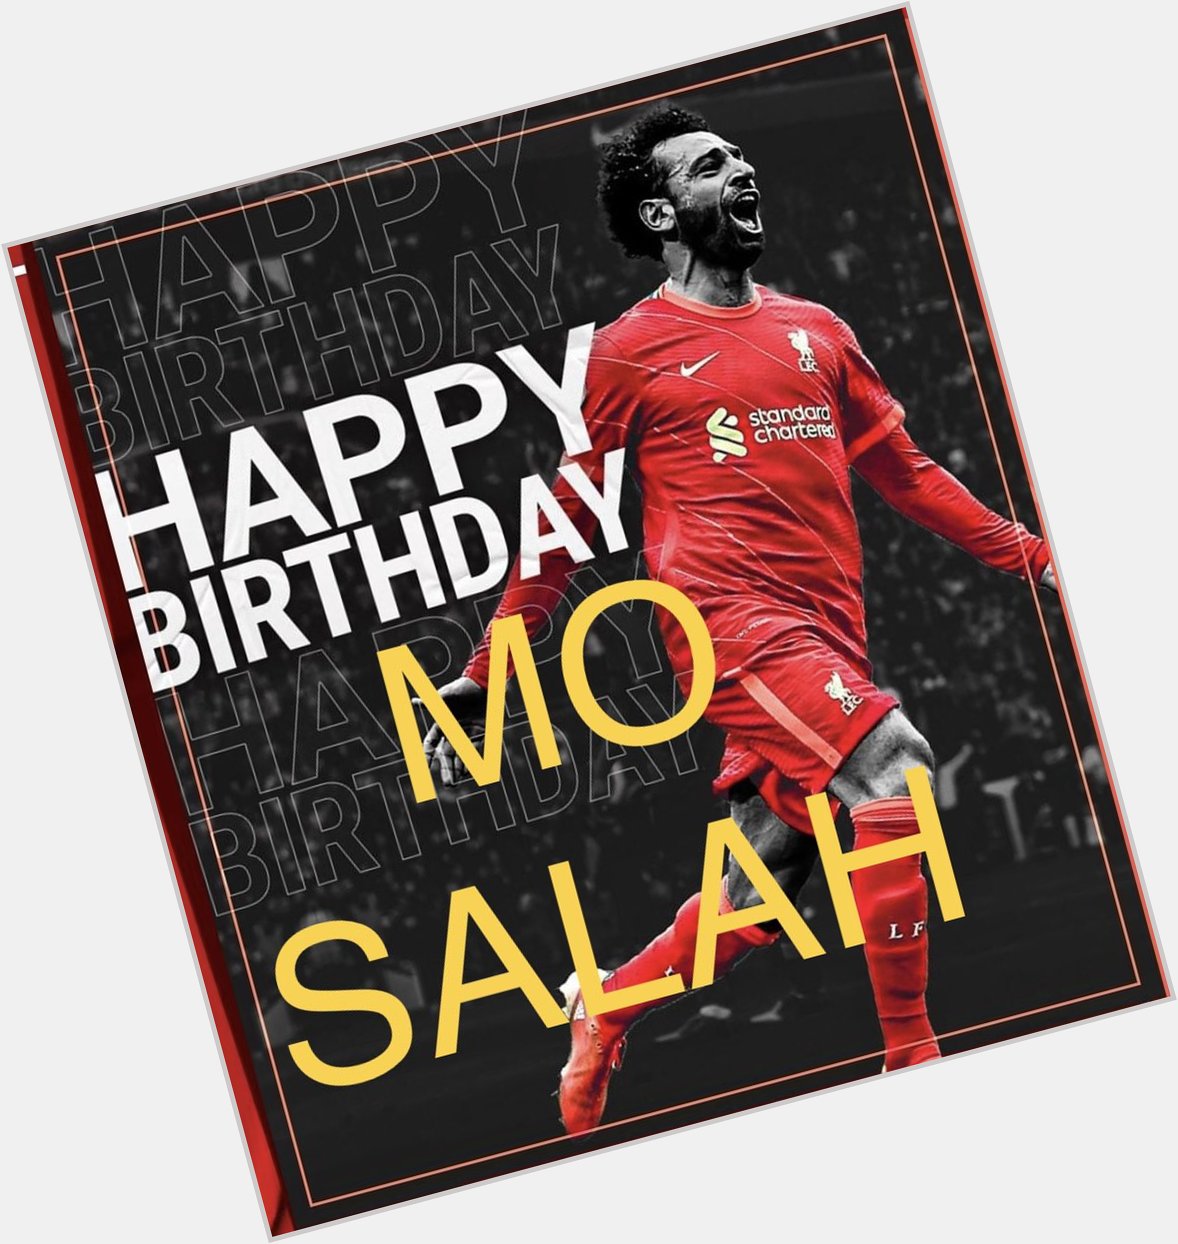 Wishing happy birthday for our Egyptian king
 I congratulate our player on his happy birthday 